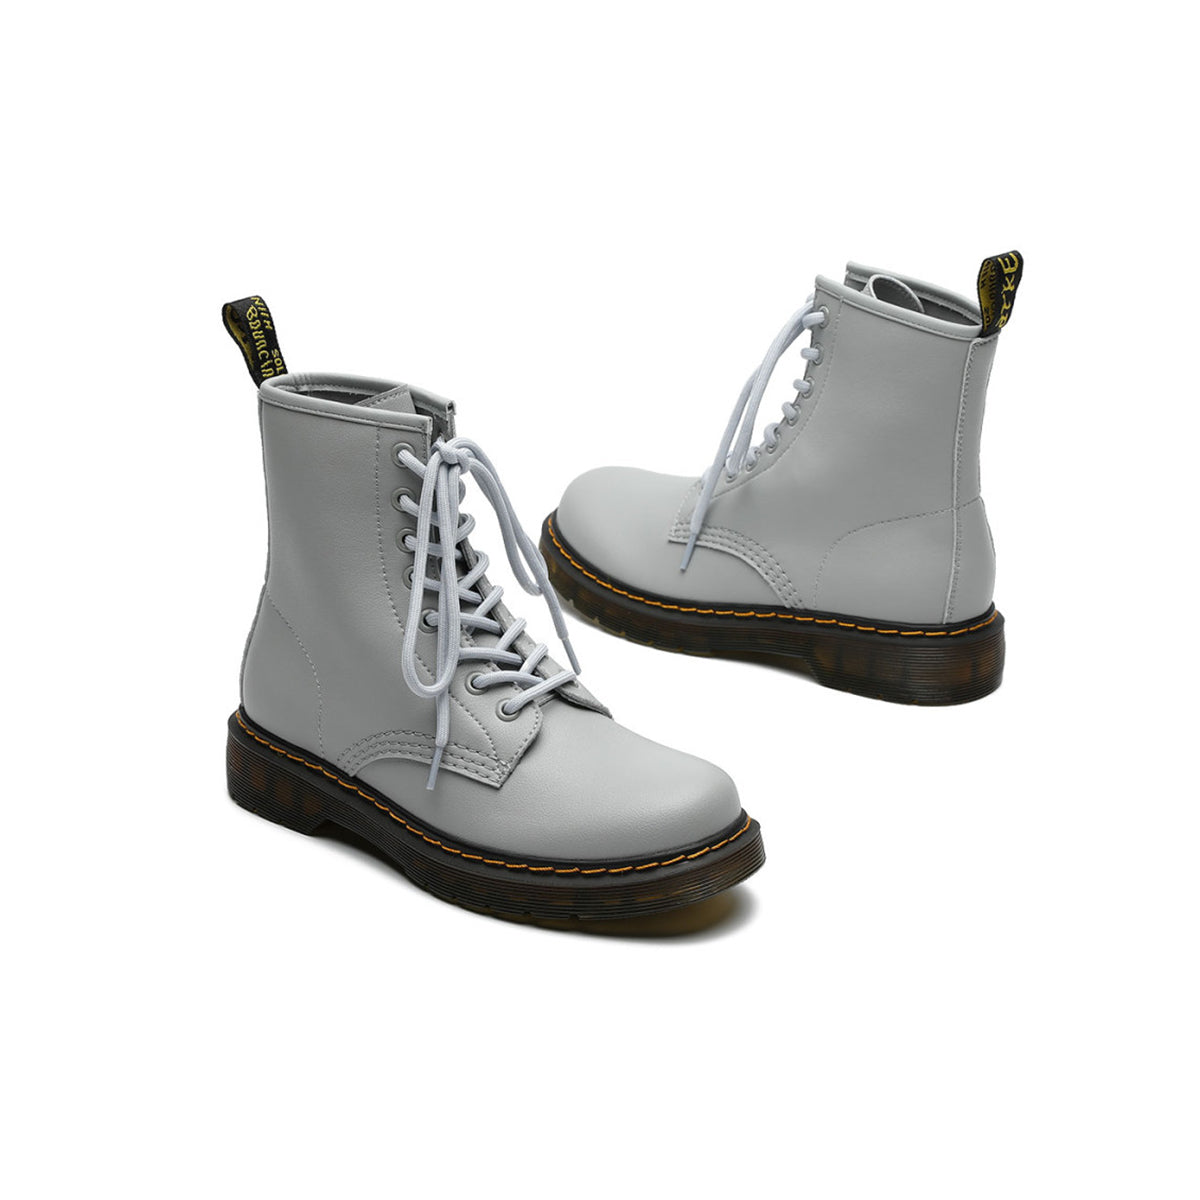 London Fog Grey Ankle Boots